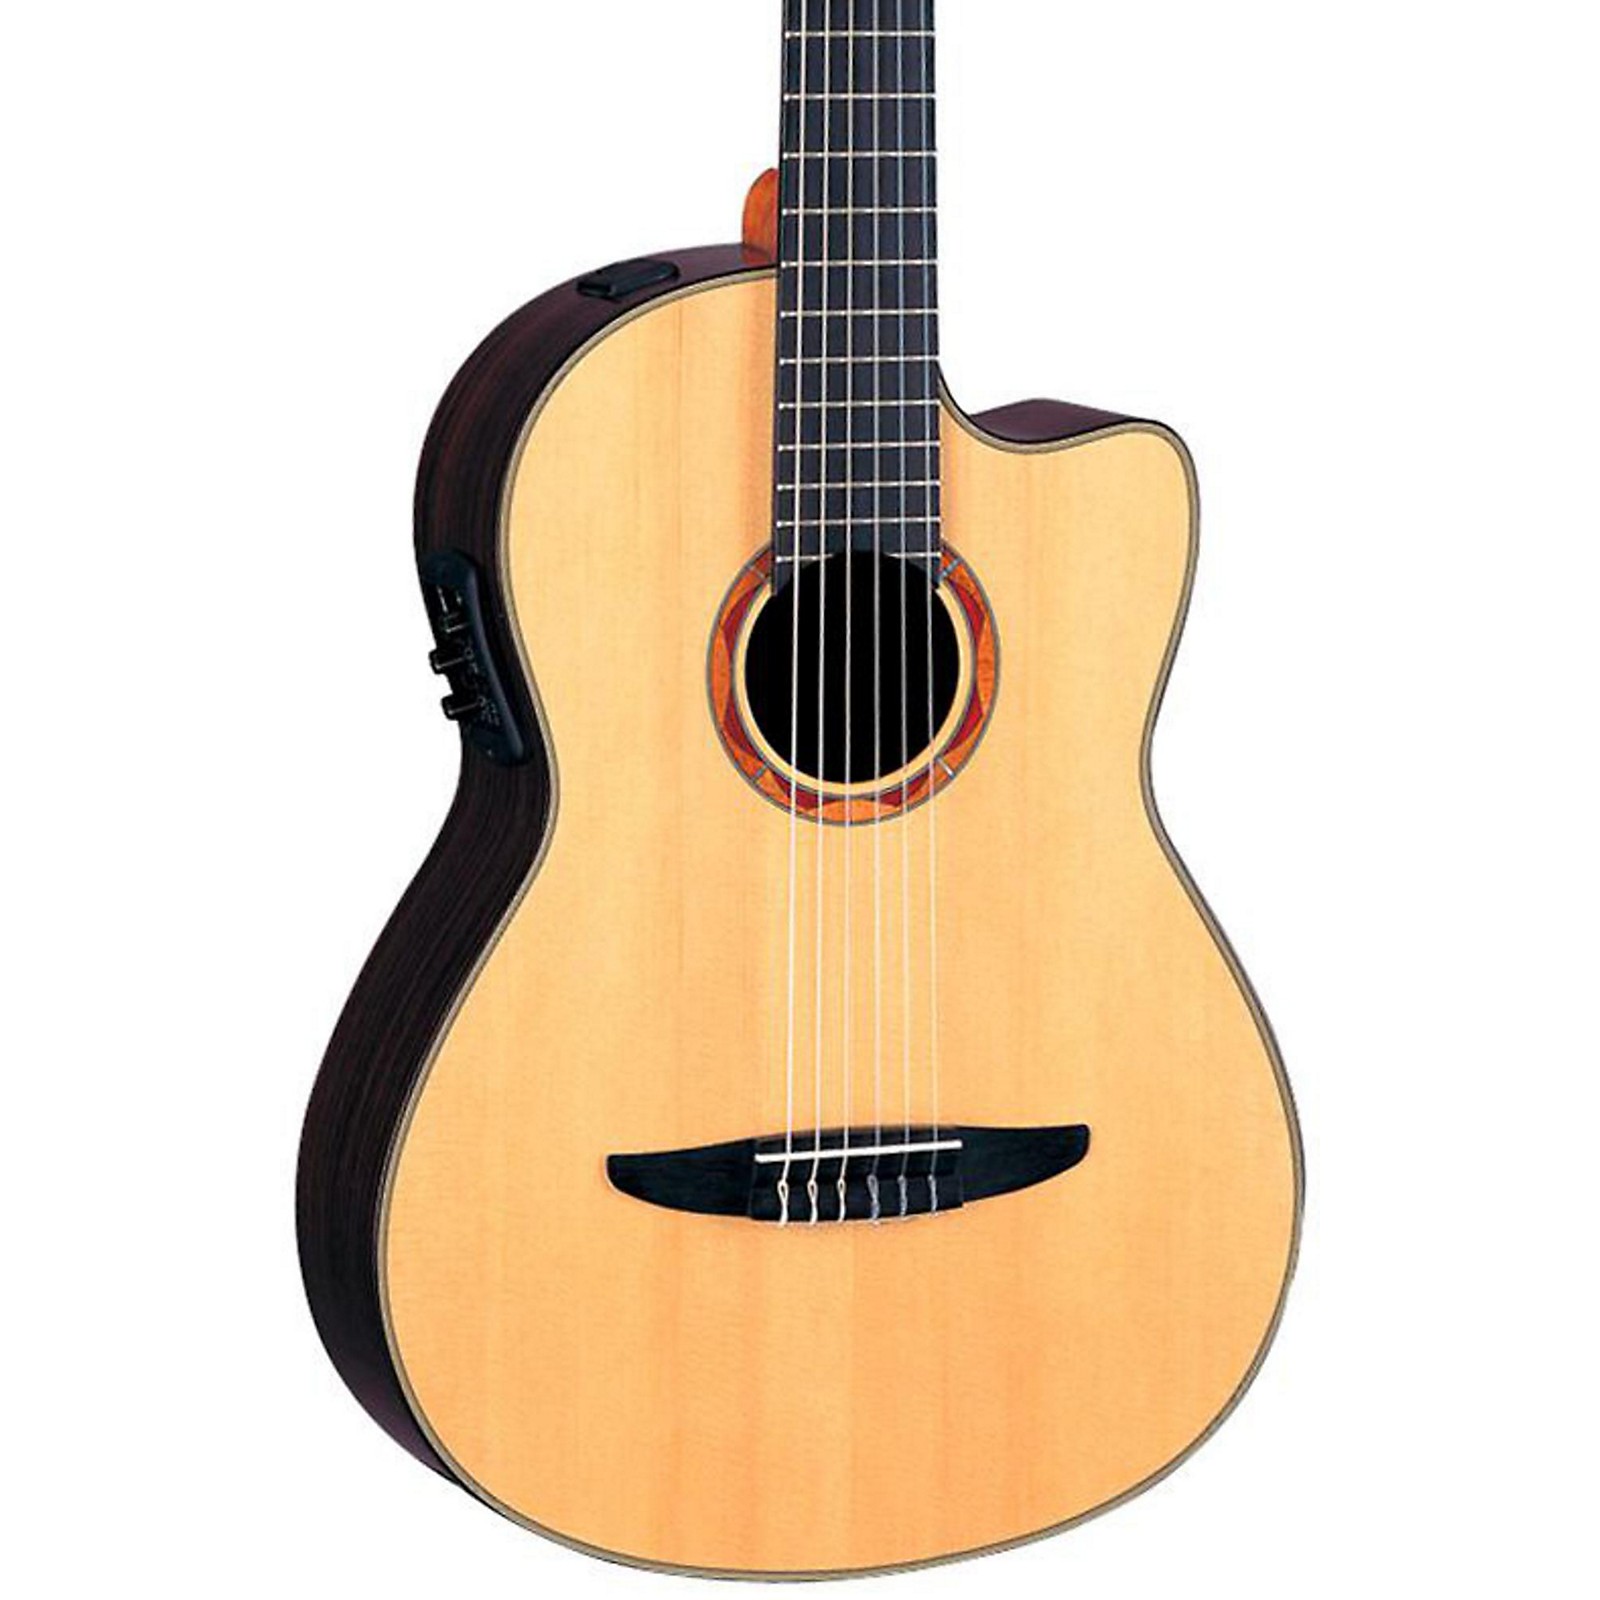 Yamaha Ncx1200r Acoustic Electric Classical Guitar Musician S Friend